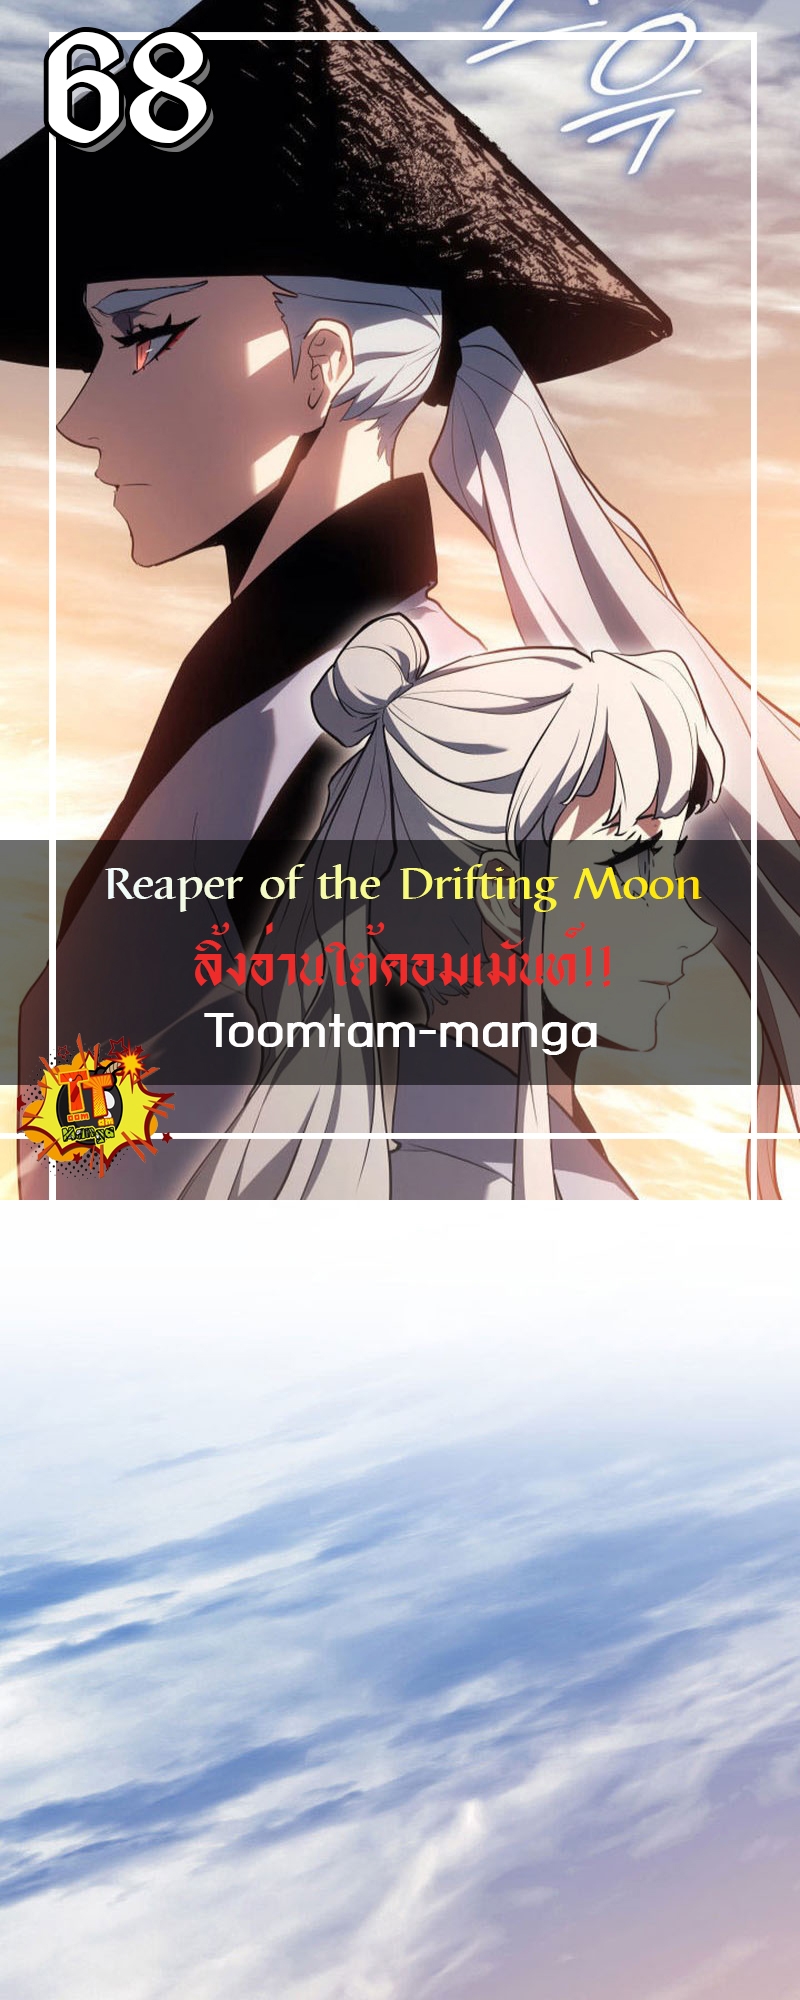 Reaper of the Drifting Moon 68 27 12 25660001